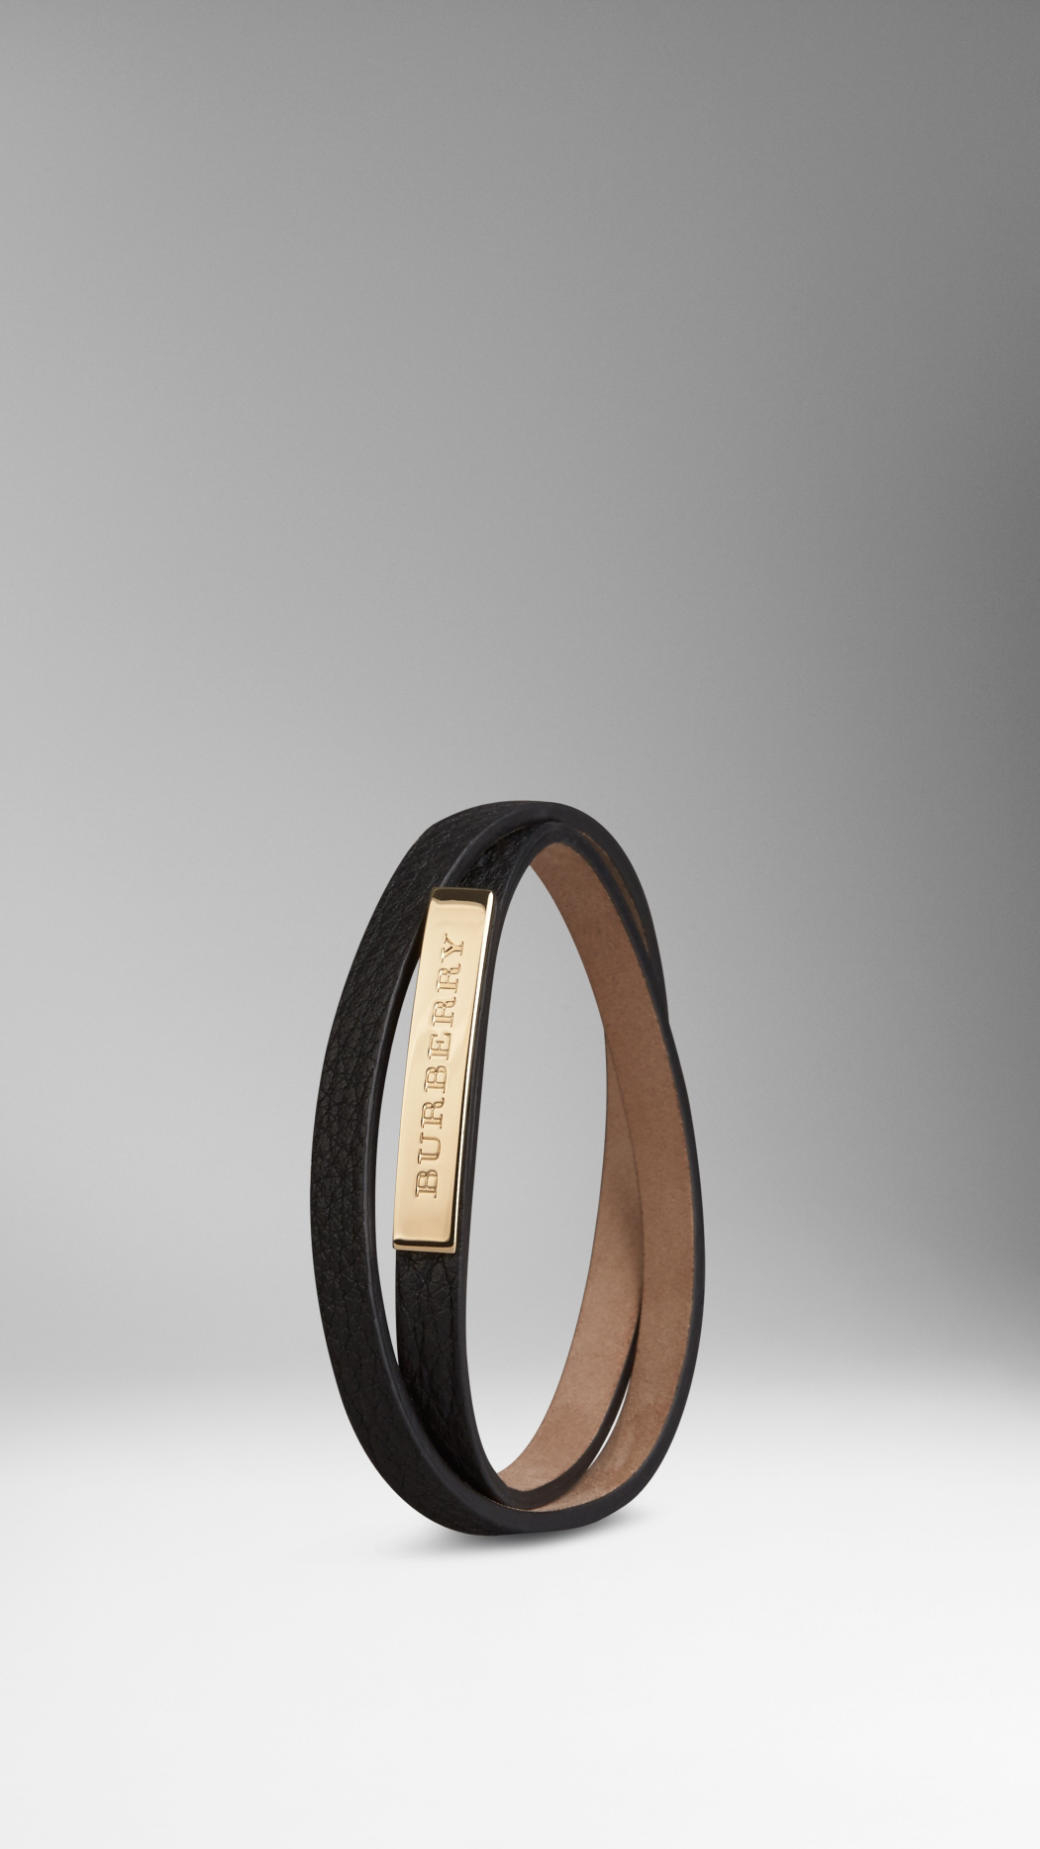 Burberry Tb Bangle Bracelet in Natural | Lyst